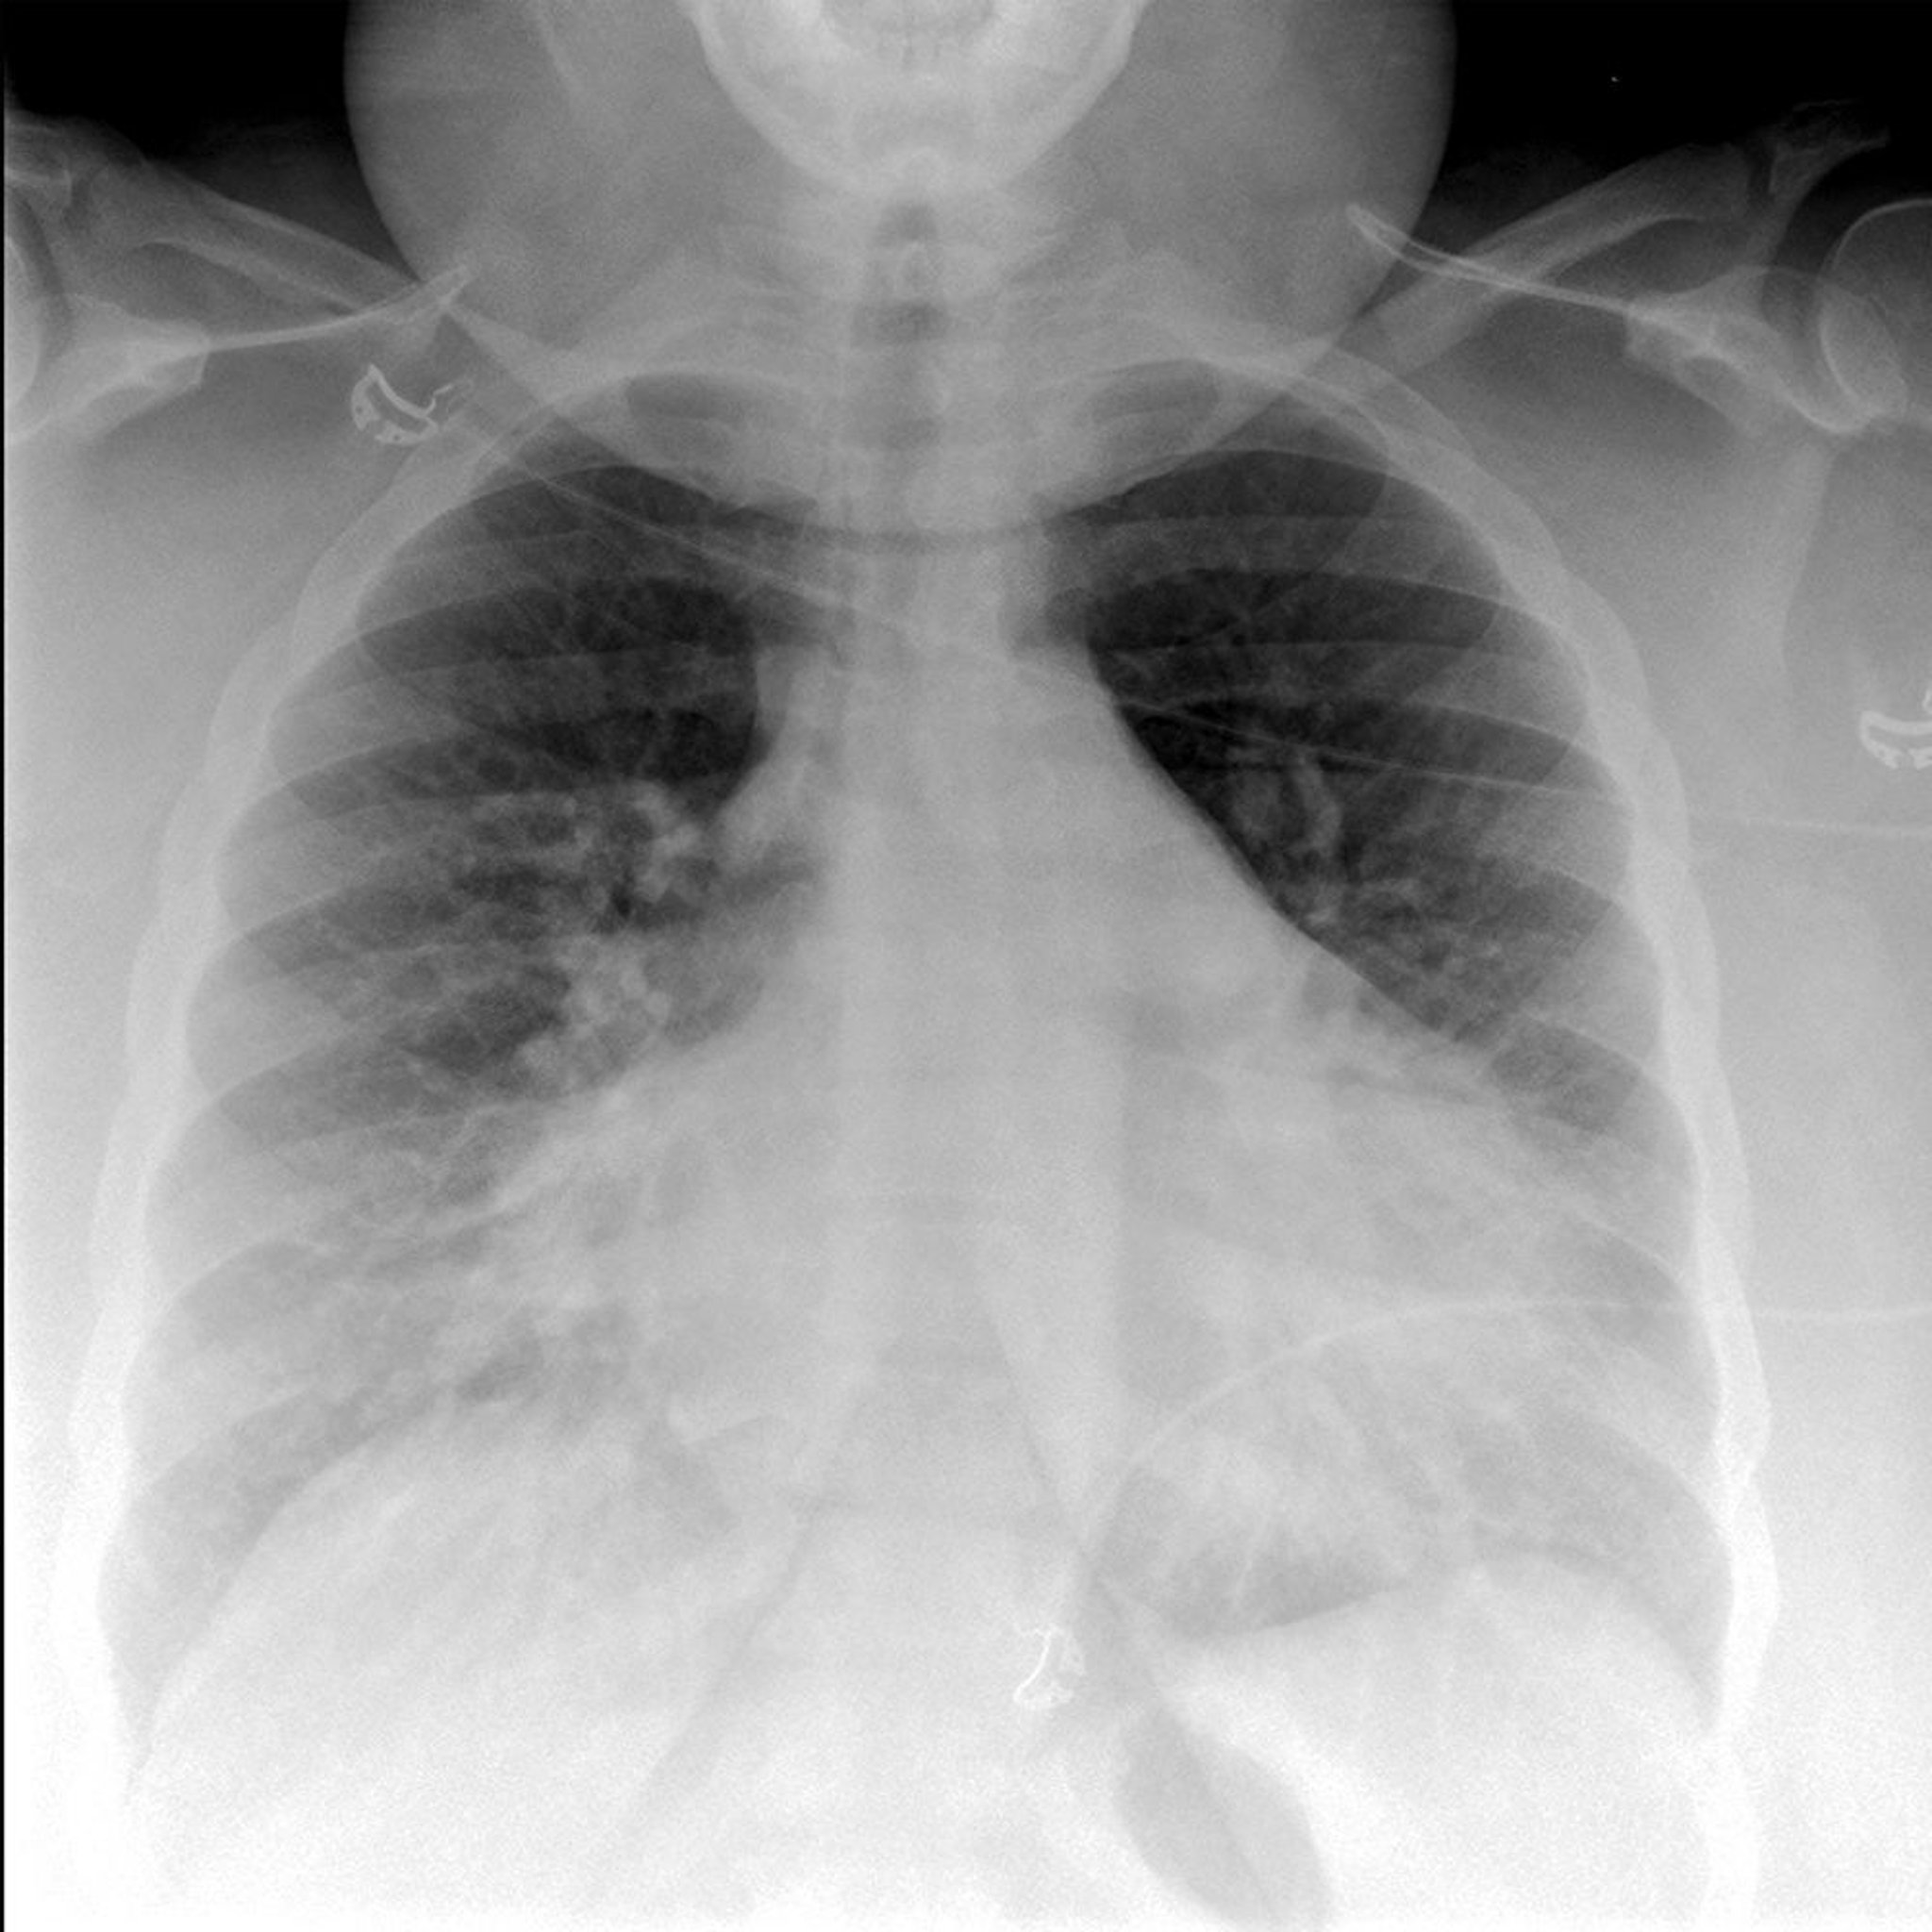 Chest X-Ray of a Patient with Pulmonary Edema